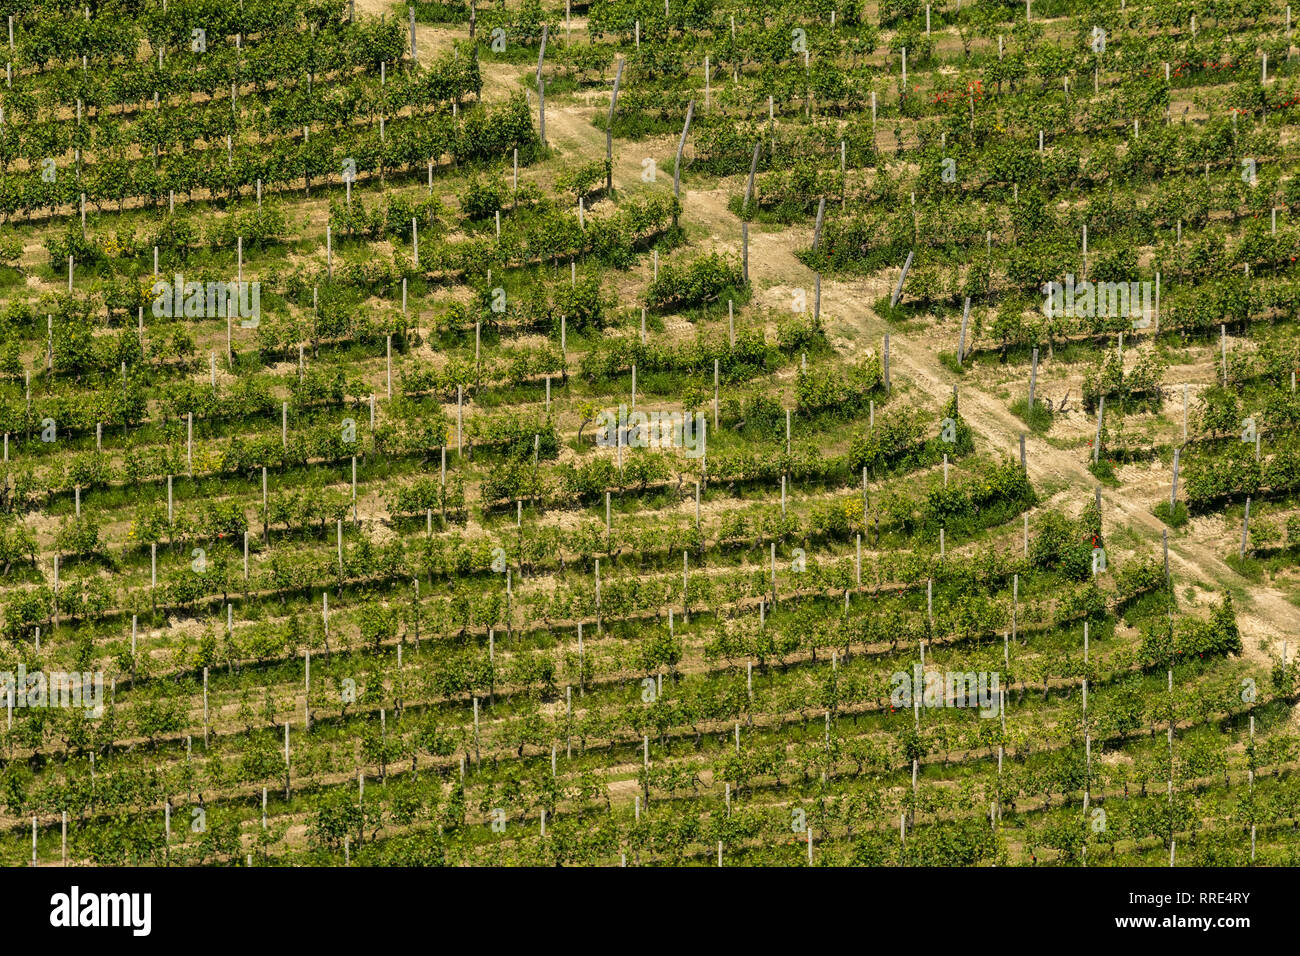 Rows of green grapevines in an Italian vineyard in the Piedmont region Stock Photo